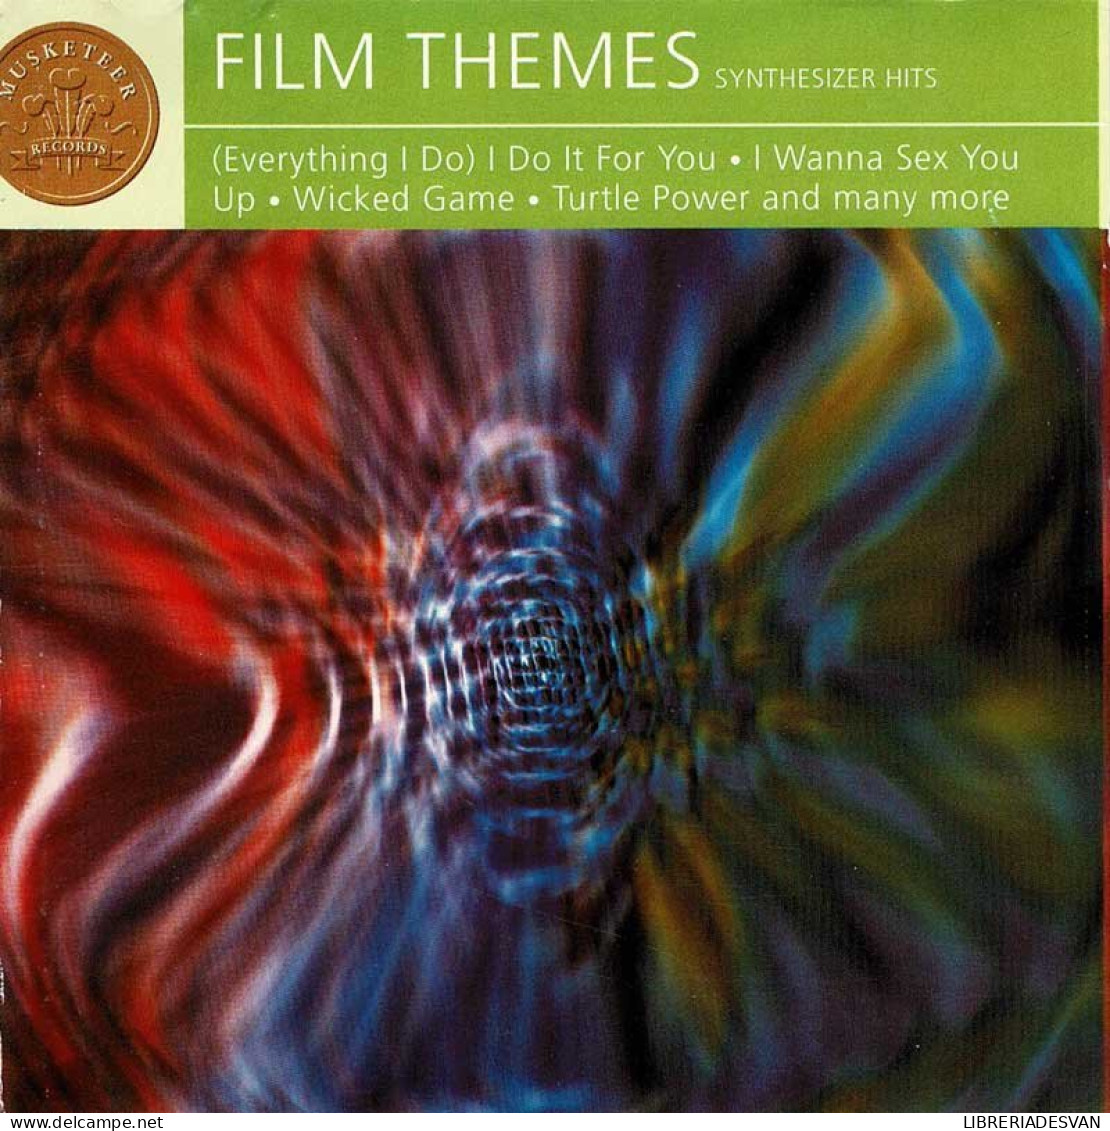 The London Studio Orchestra, The Hollywood Studio Orchestra - Film Themes Synthesizer Hits. CD - Soundtracks, Film Music